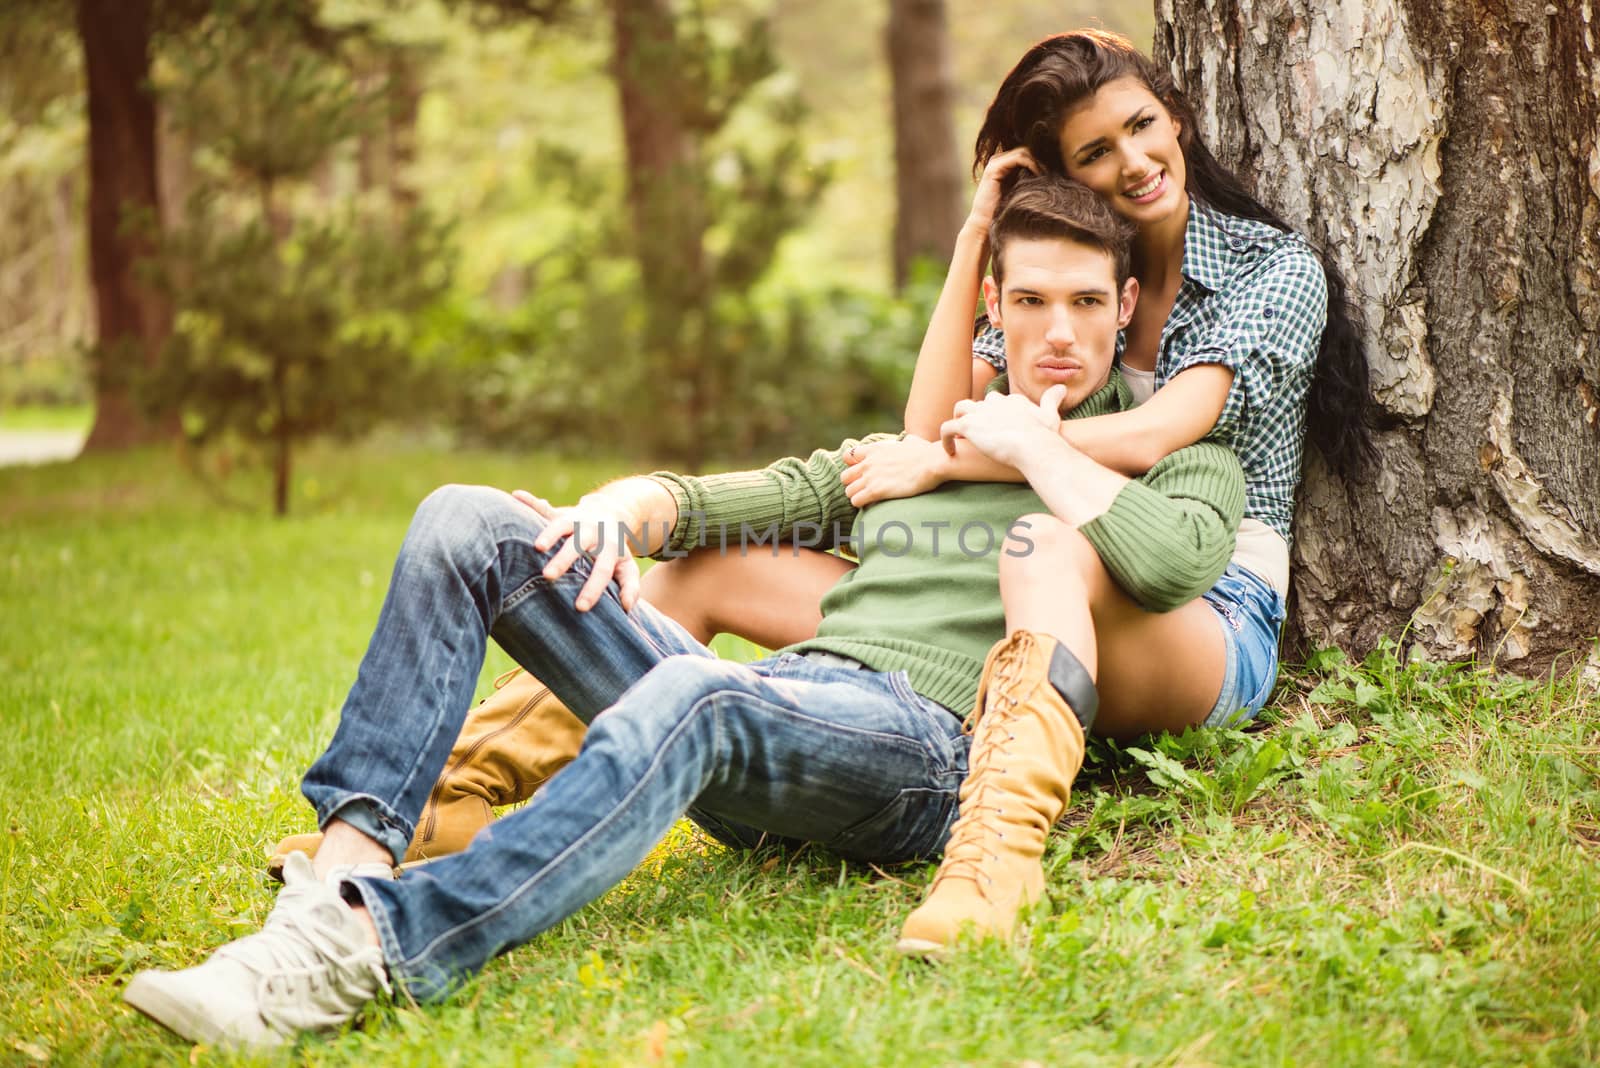 Beautiful brunette girl with a handsome guy, sitting on the grass in the park. The girl was leaning against a tree with a smile looking at the camera, a guy sitting among the girl's legs, leaning back on her.